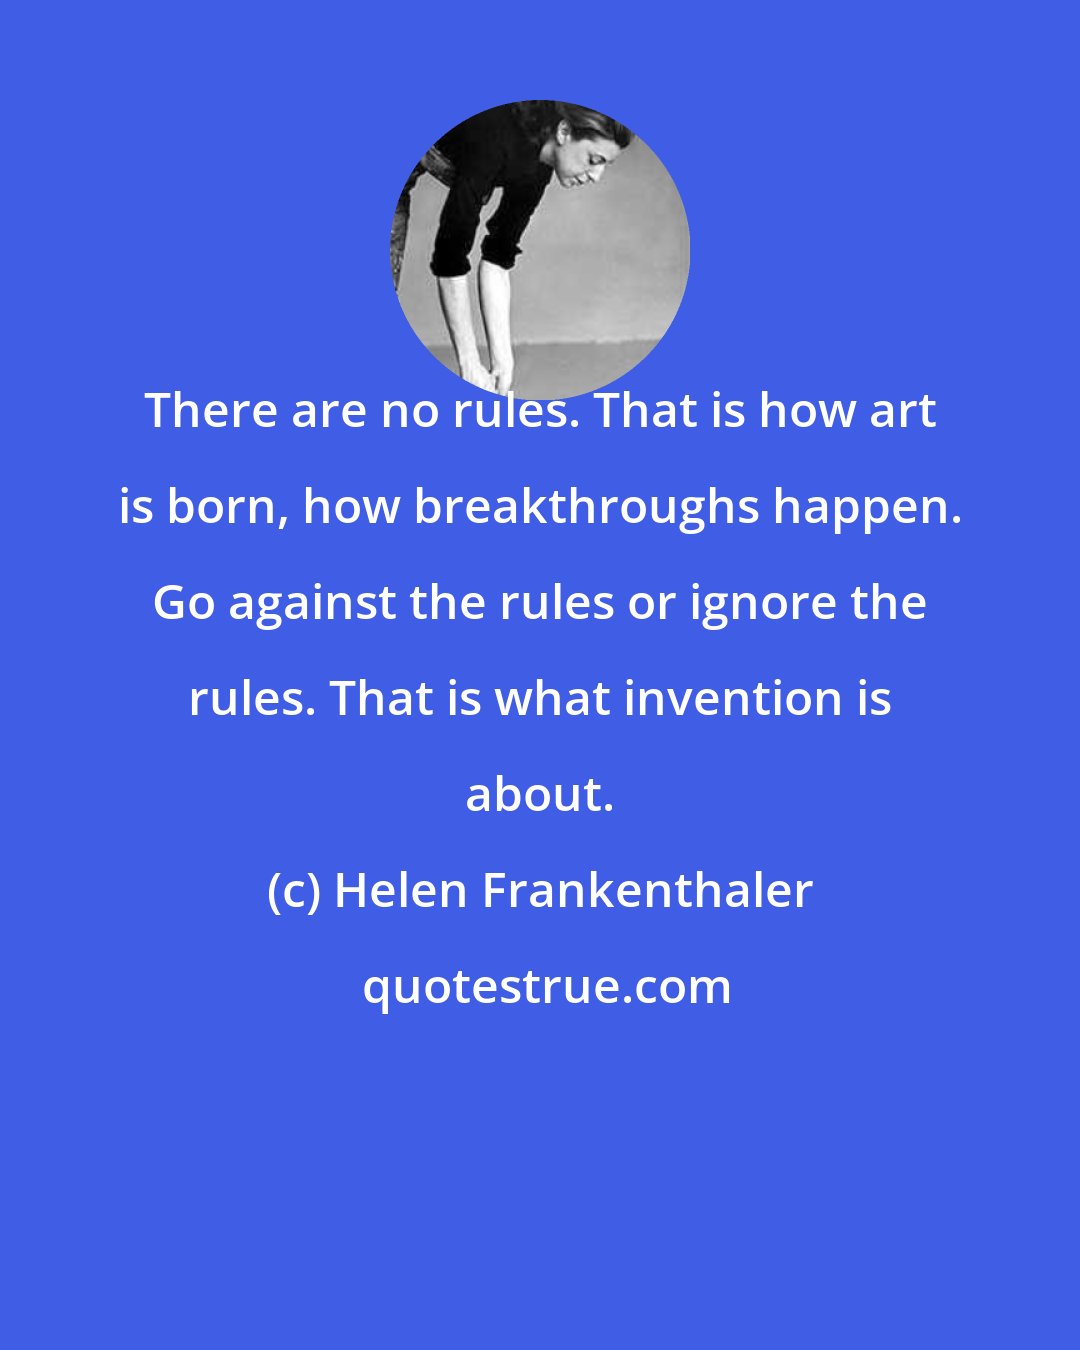 Helen Frankenthaler: There are no rules. That is how art is born, how breakthroughs happen. Go against the rules or ignore the rules. That is what invention is about.